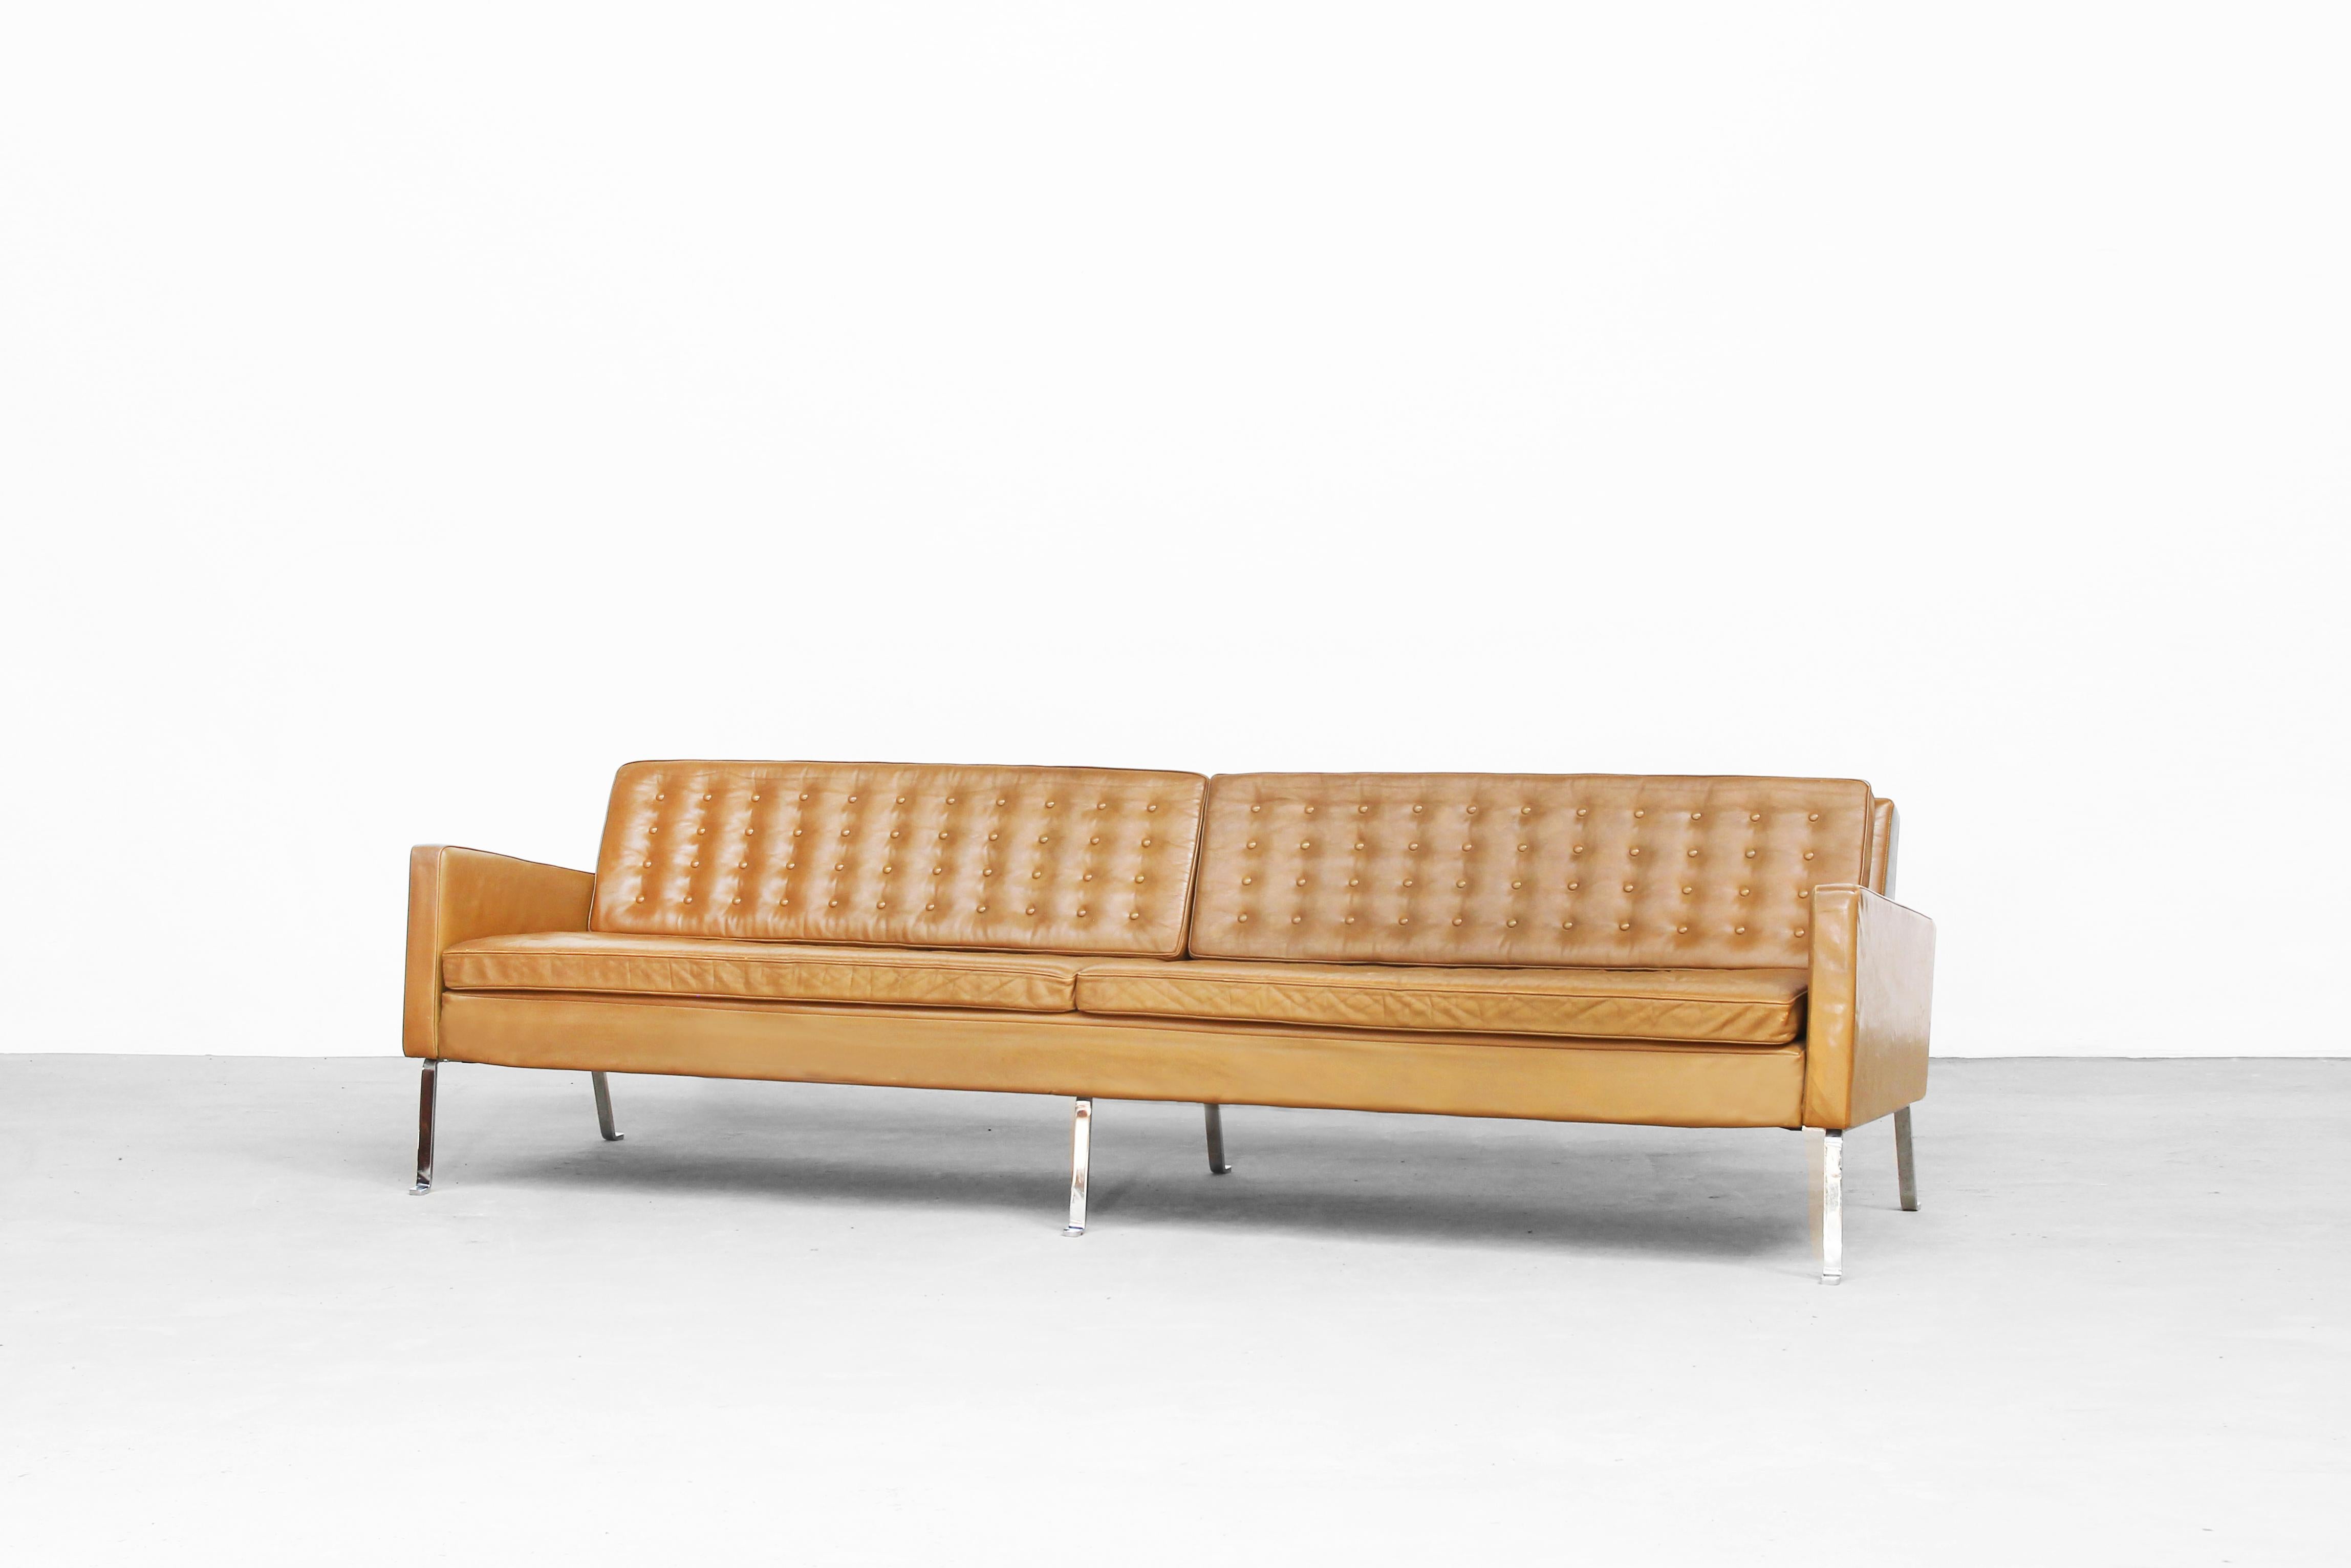 Beautiful sofa designed by Roland Rainer and produced by Wilkhahn, Germany in the 1960s.
This rare sofa comes in original lovely condition with patinated leather and visible traces of usage.